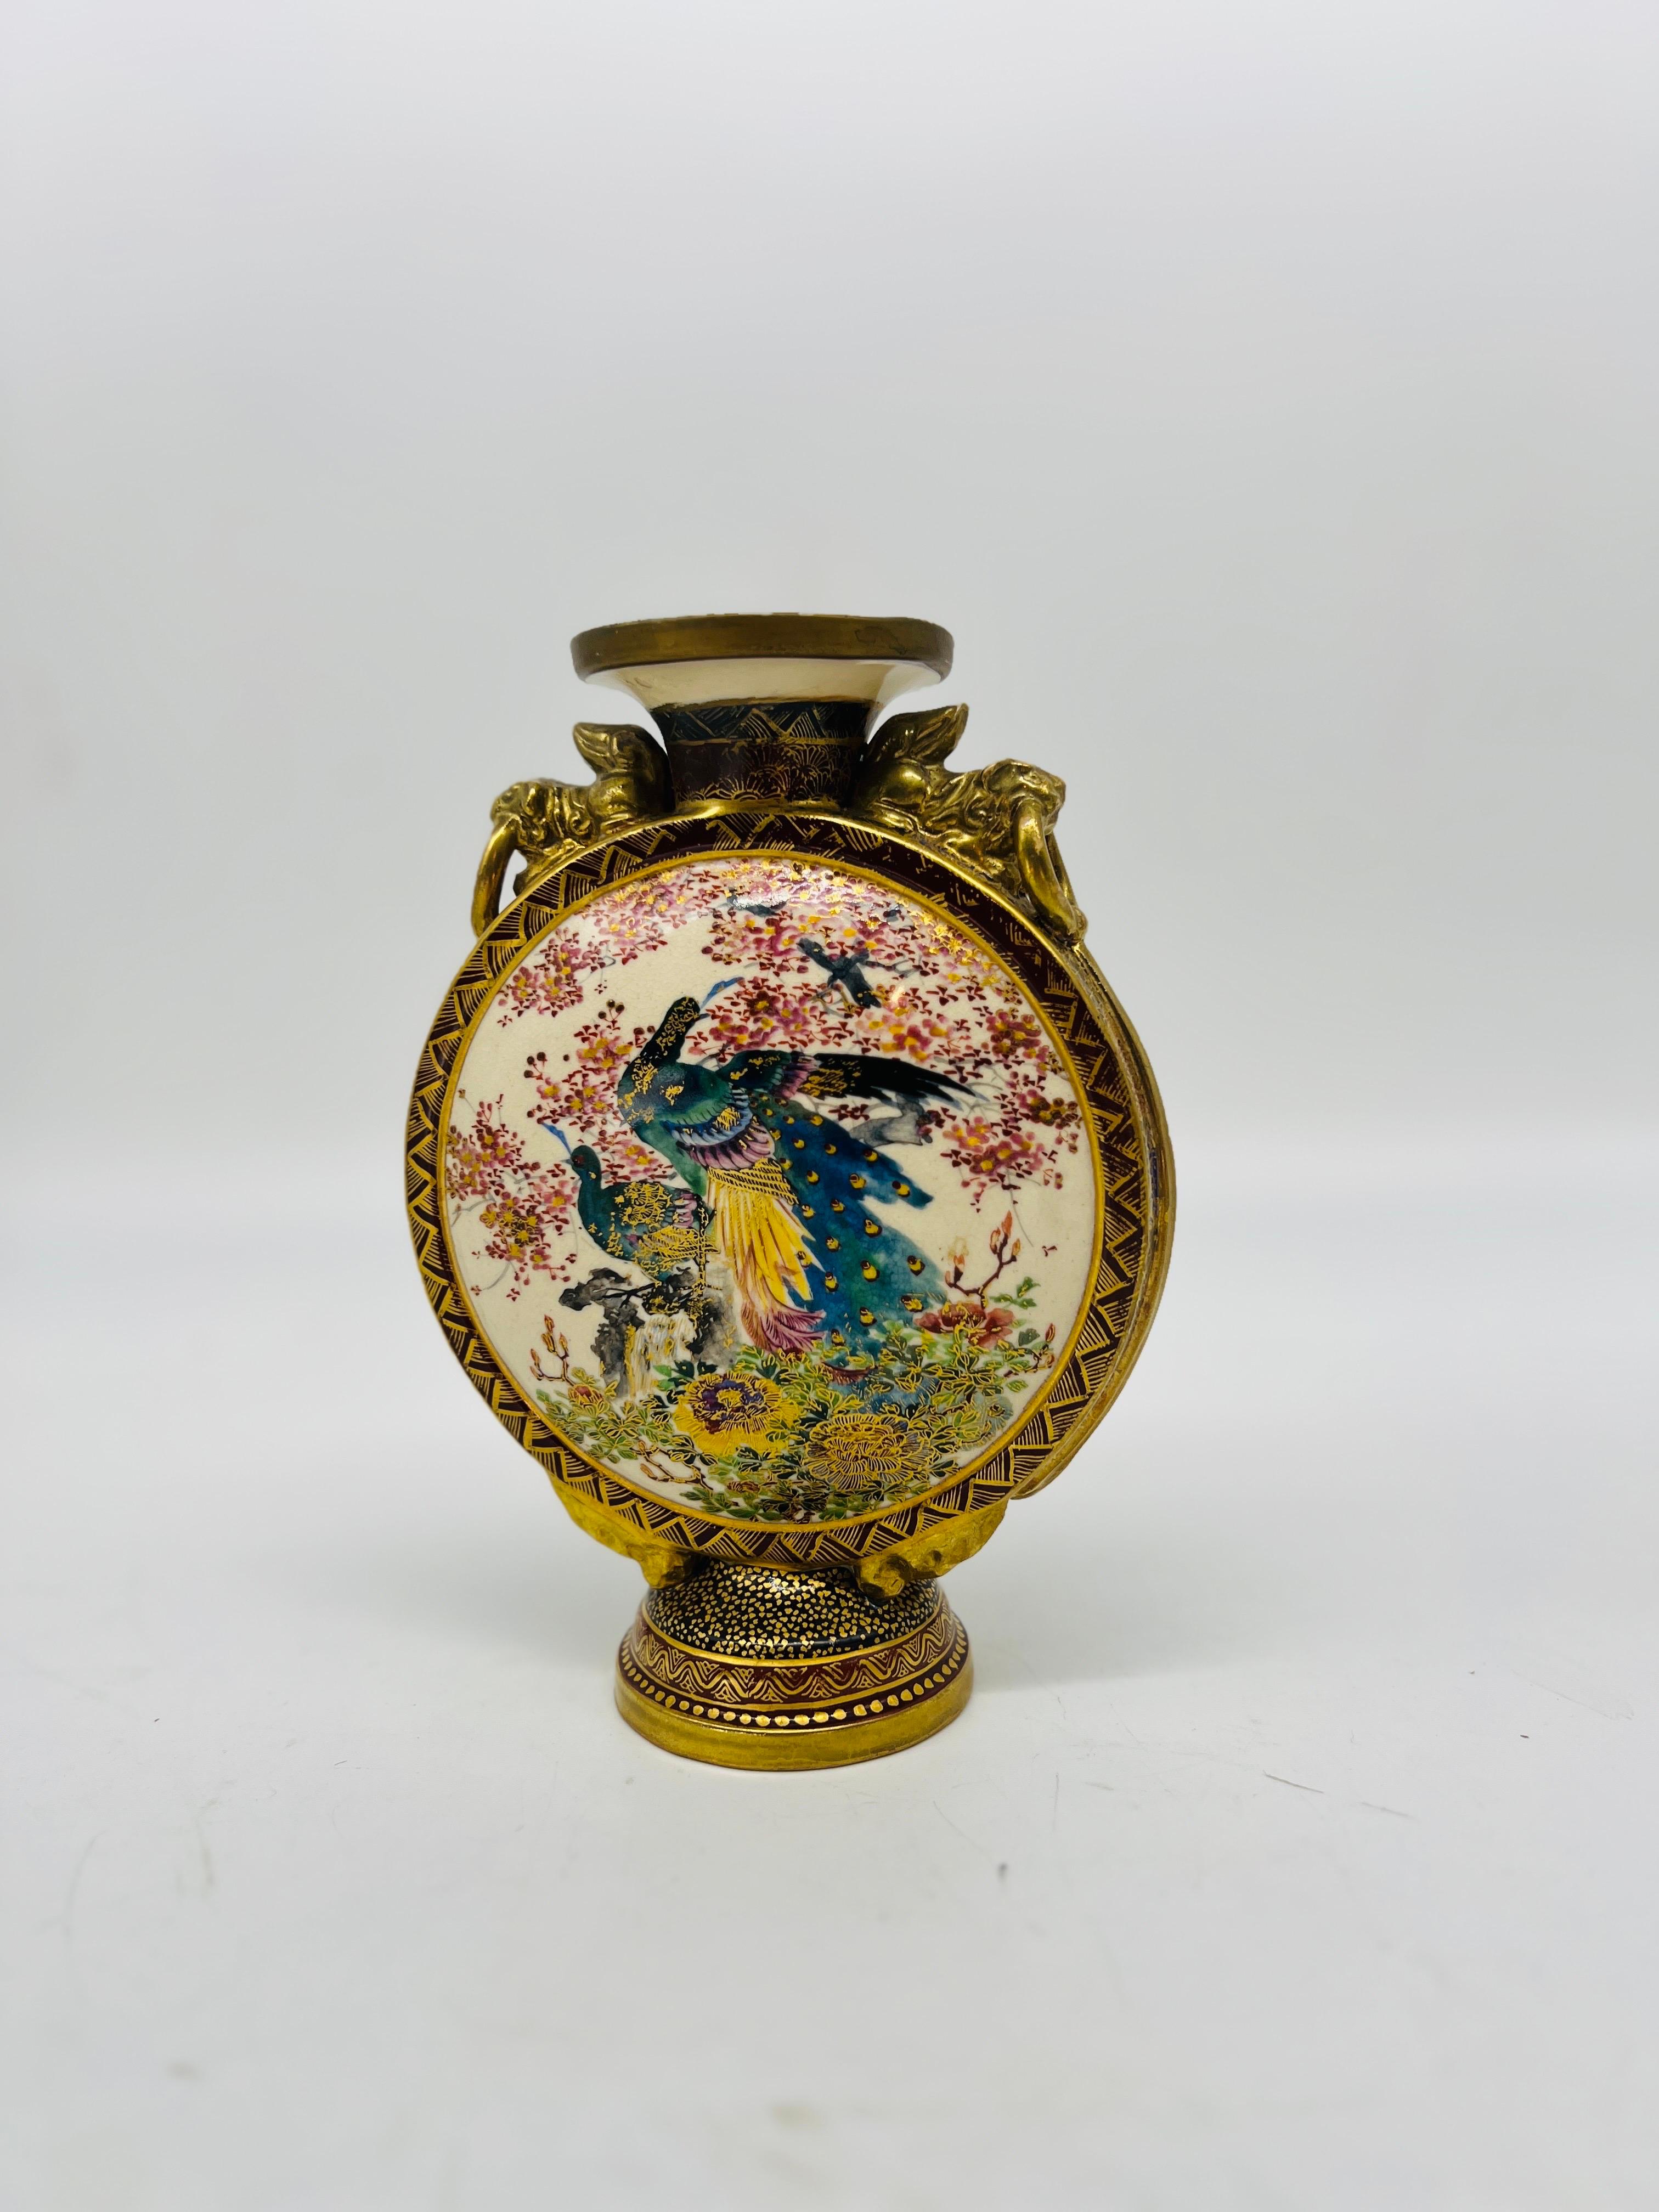 Satsuma ware has been produced since the 1600's and has a very distinct elaborately decorated body often with geometric enamel works throughout. Some of the most elaborate pieces made during the Edo and Meiji periods of Japan's history. Collectors